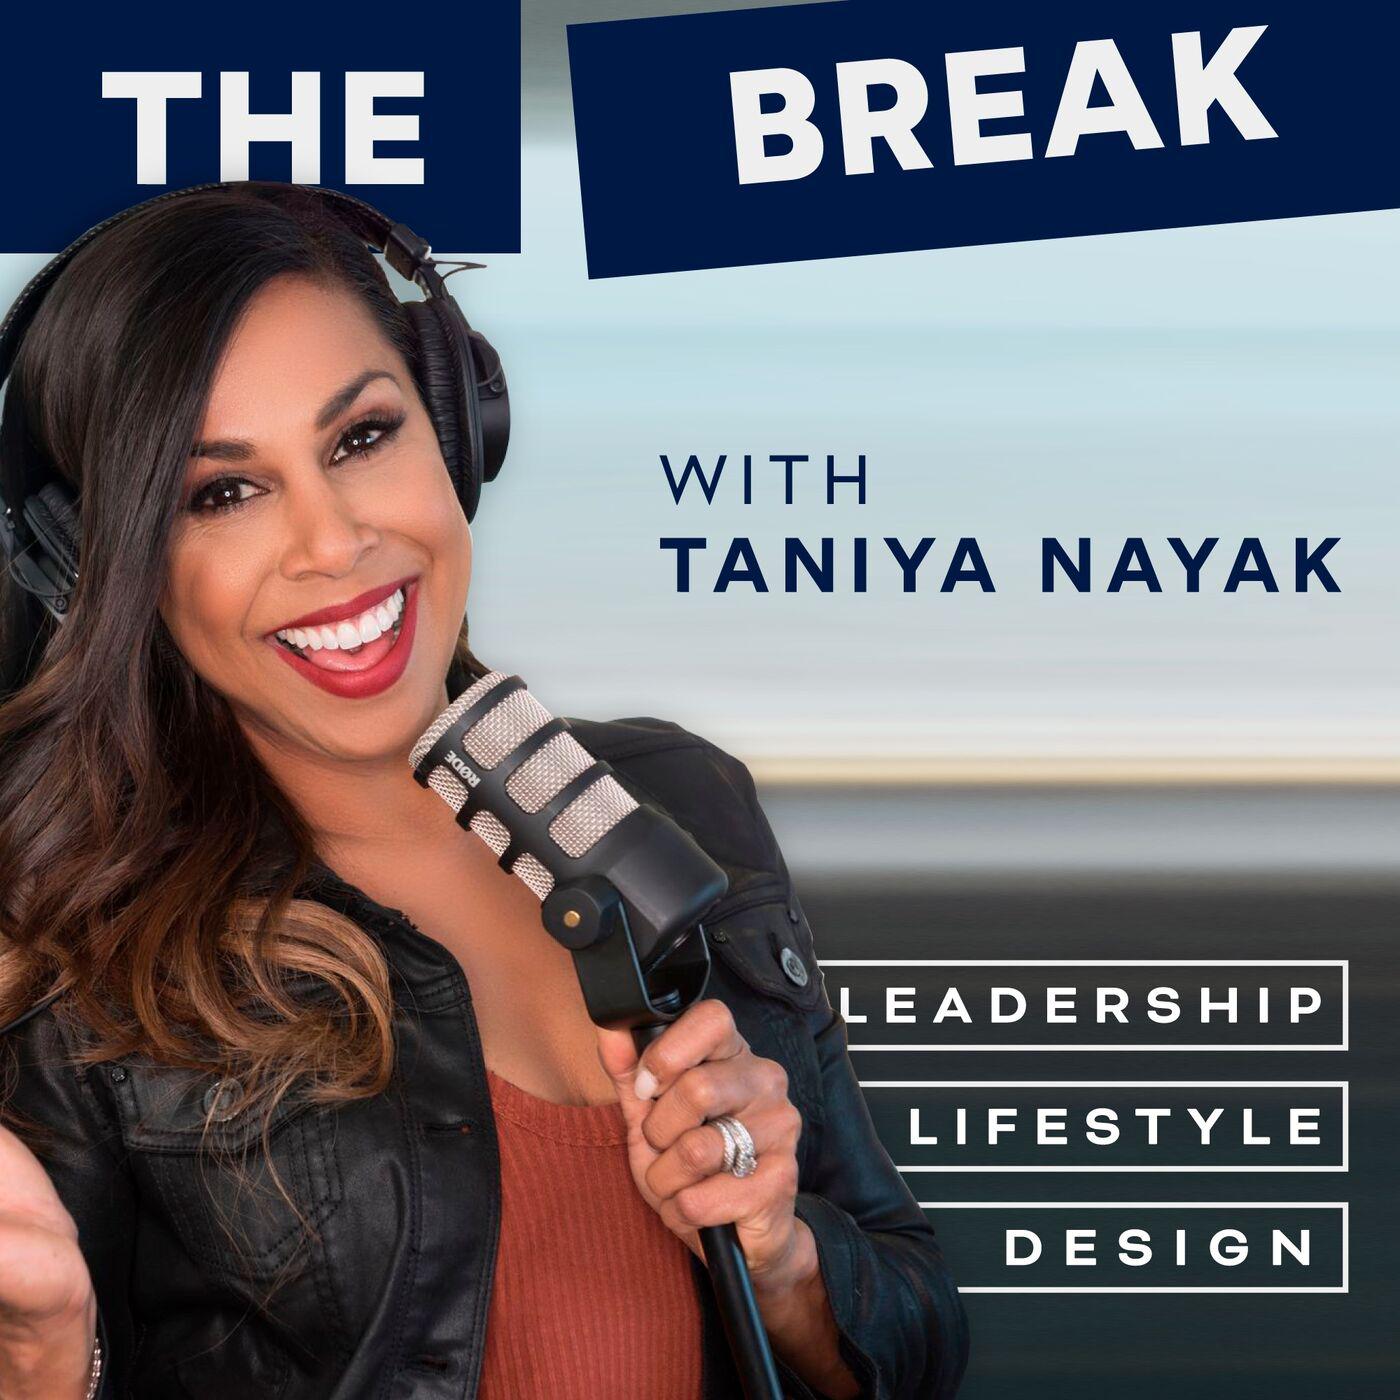 INTERVIEW | Don’t Be Afraid To Be A Hypocrite, It Just Means Your Values Have Changed And You’re Accelerating In The Direction You Want on The Break Podcast